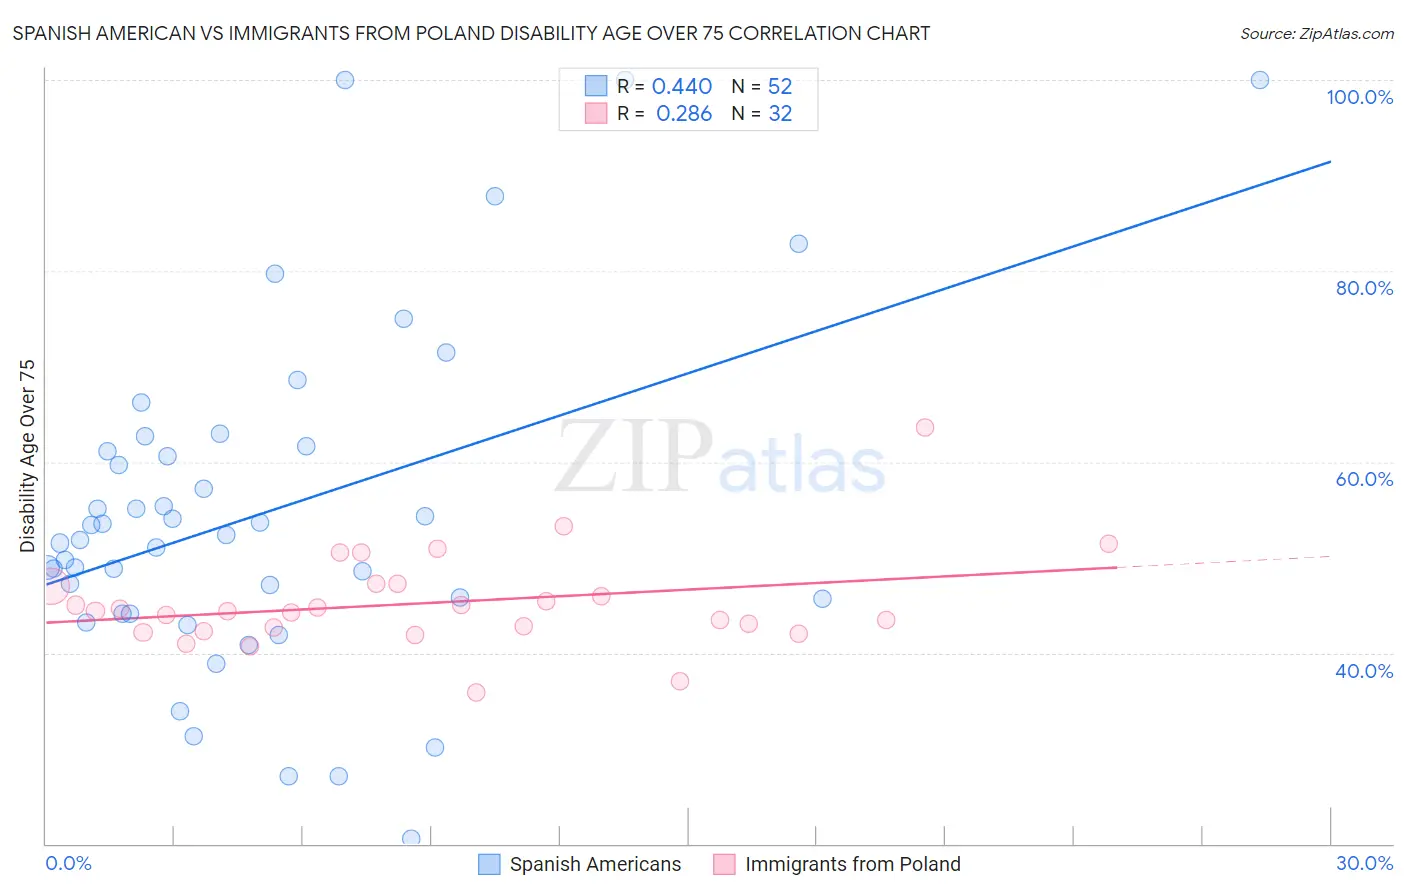 Spanish American vs Immigrants from Poland Disability Age Over 75